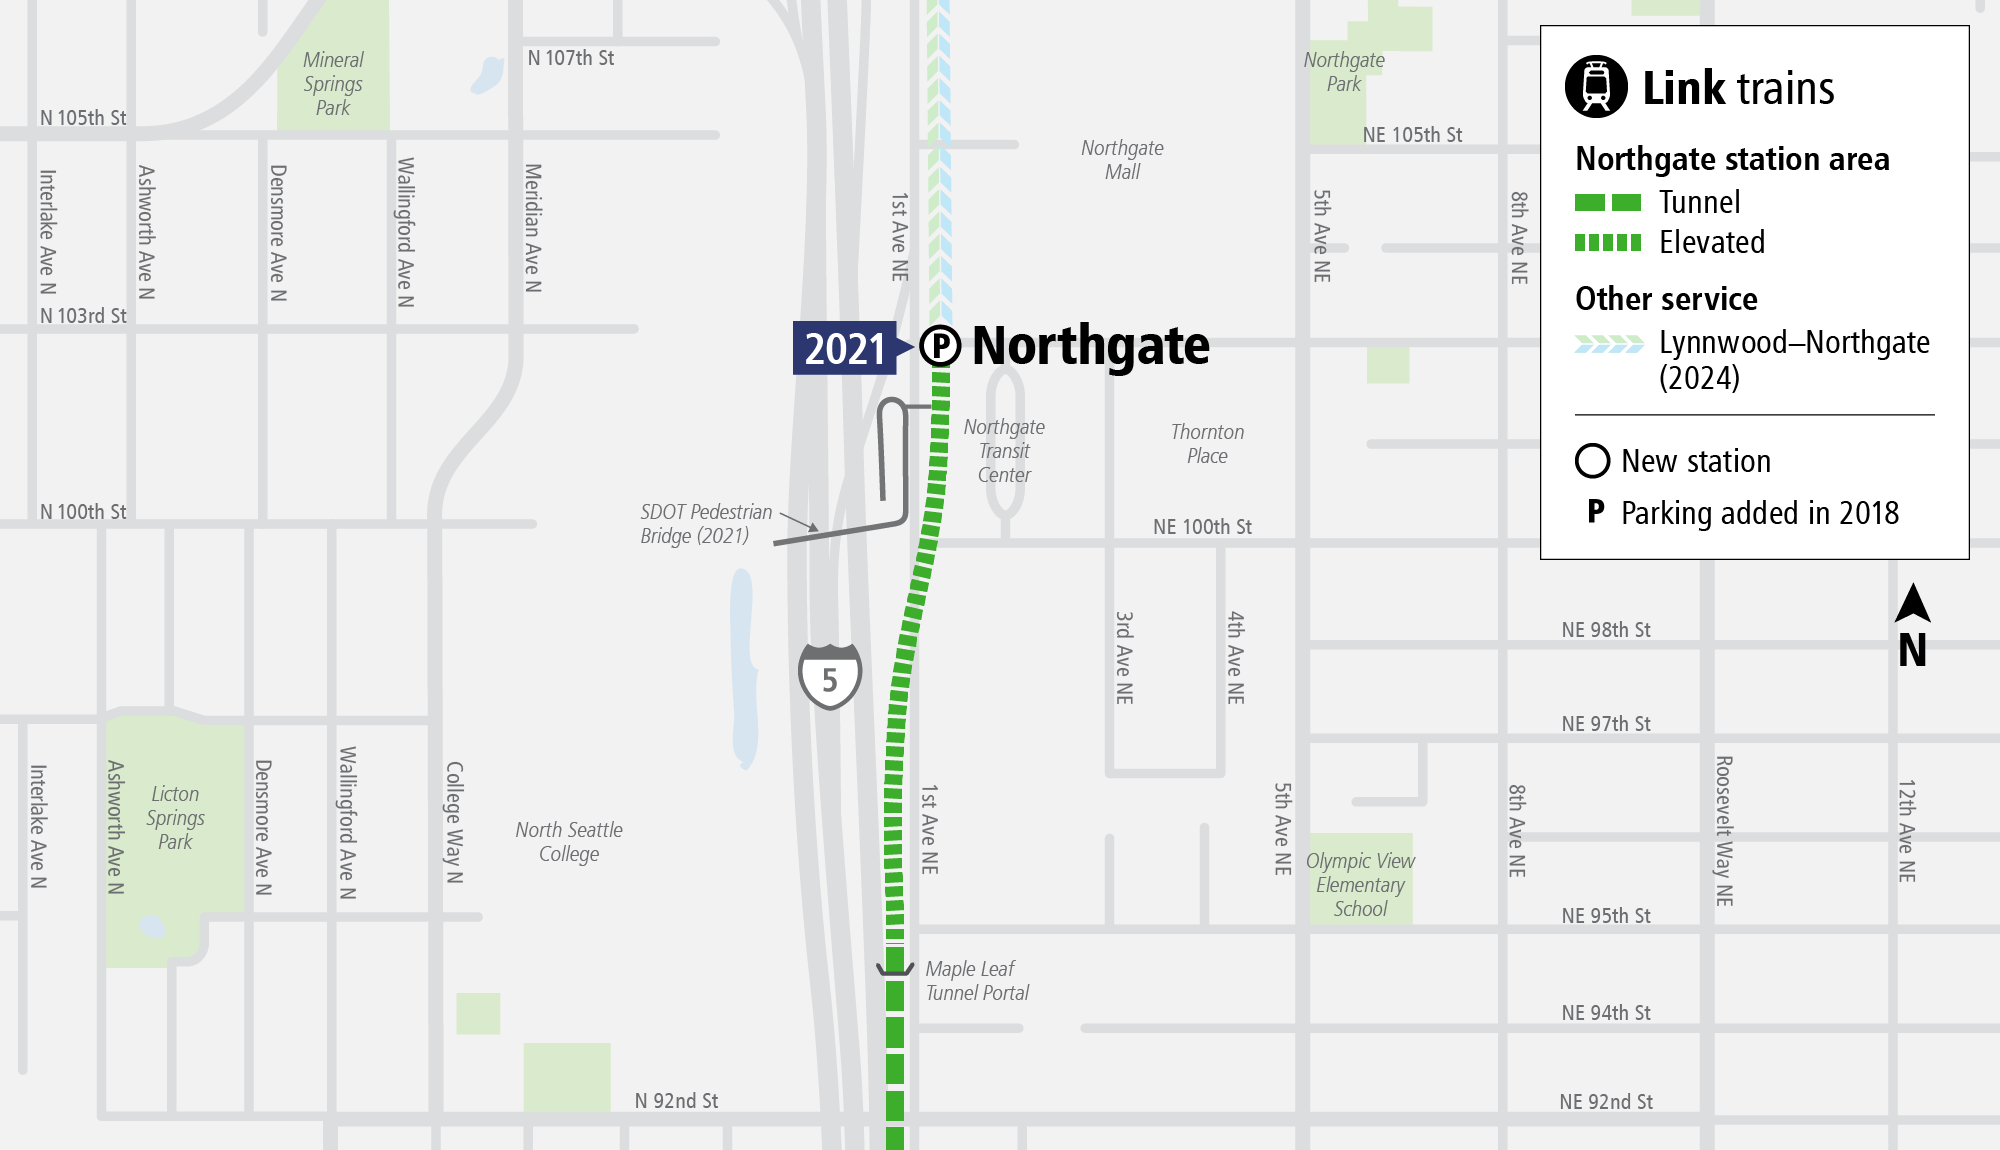 System Expansion web map for Northgate Station